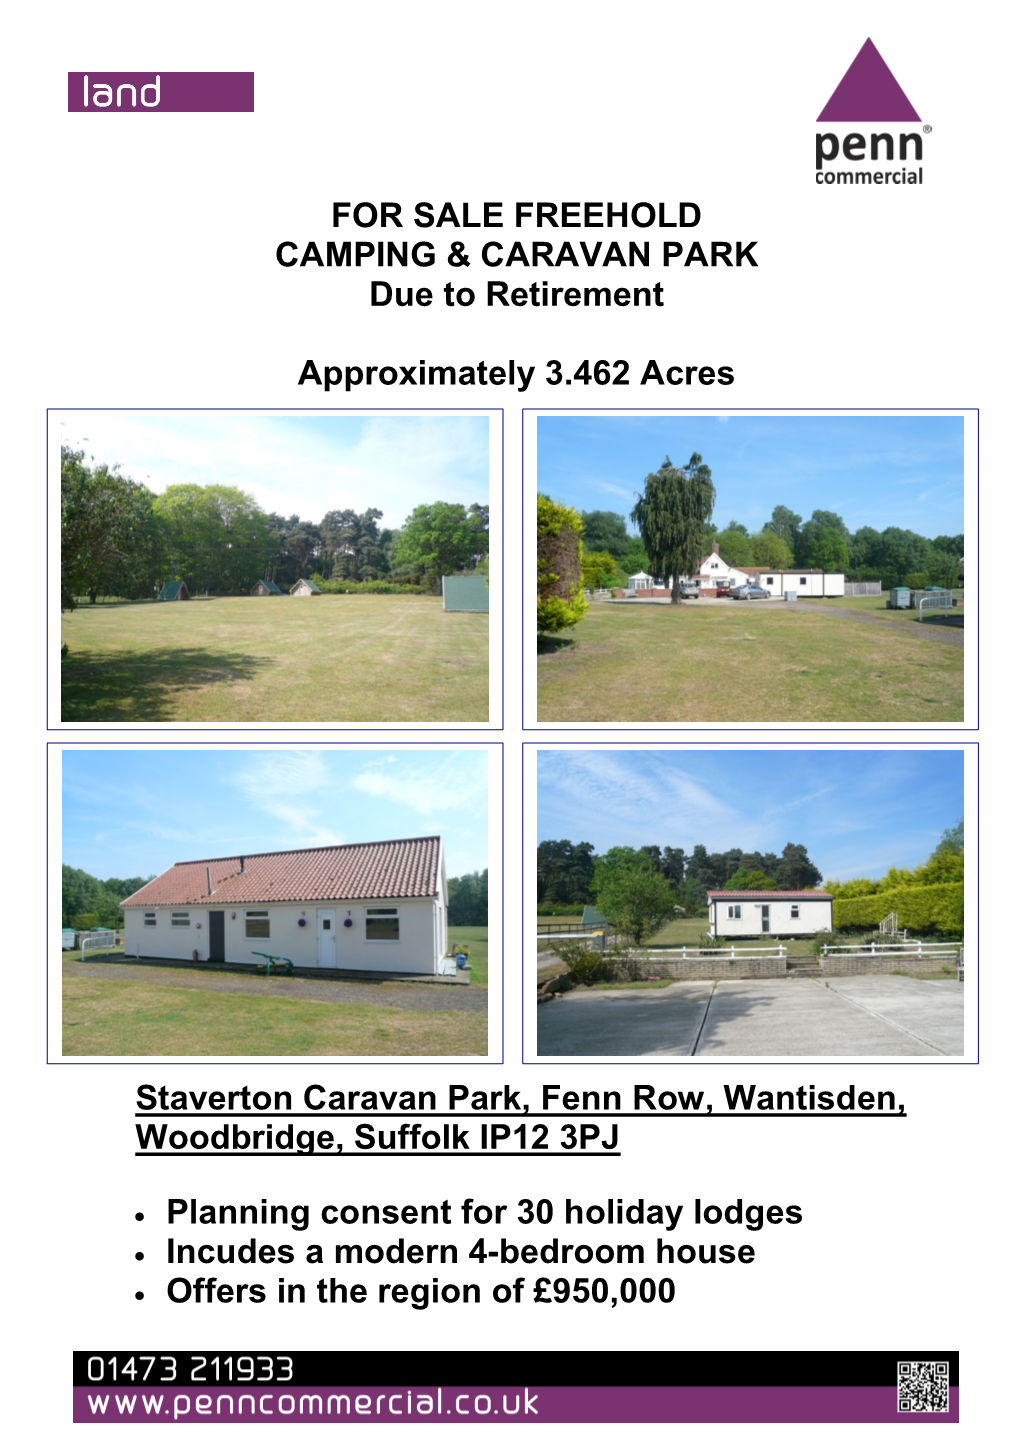 FOR SALE FREEHOLD CAMPING & CARAVAN PARK Due To